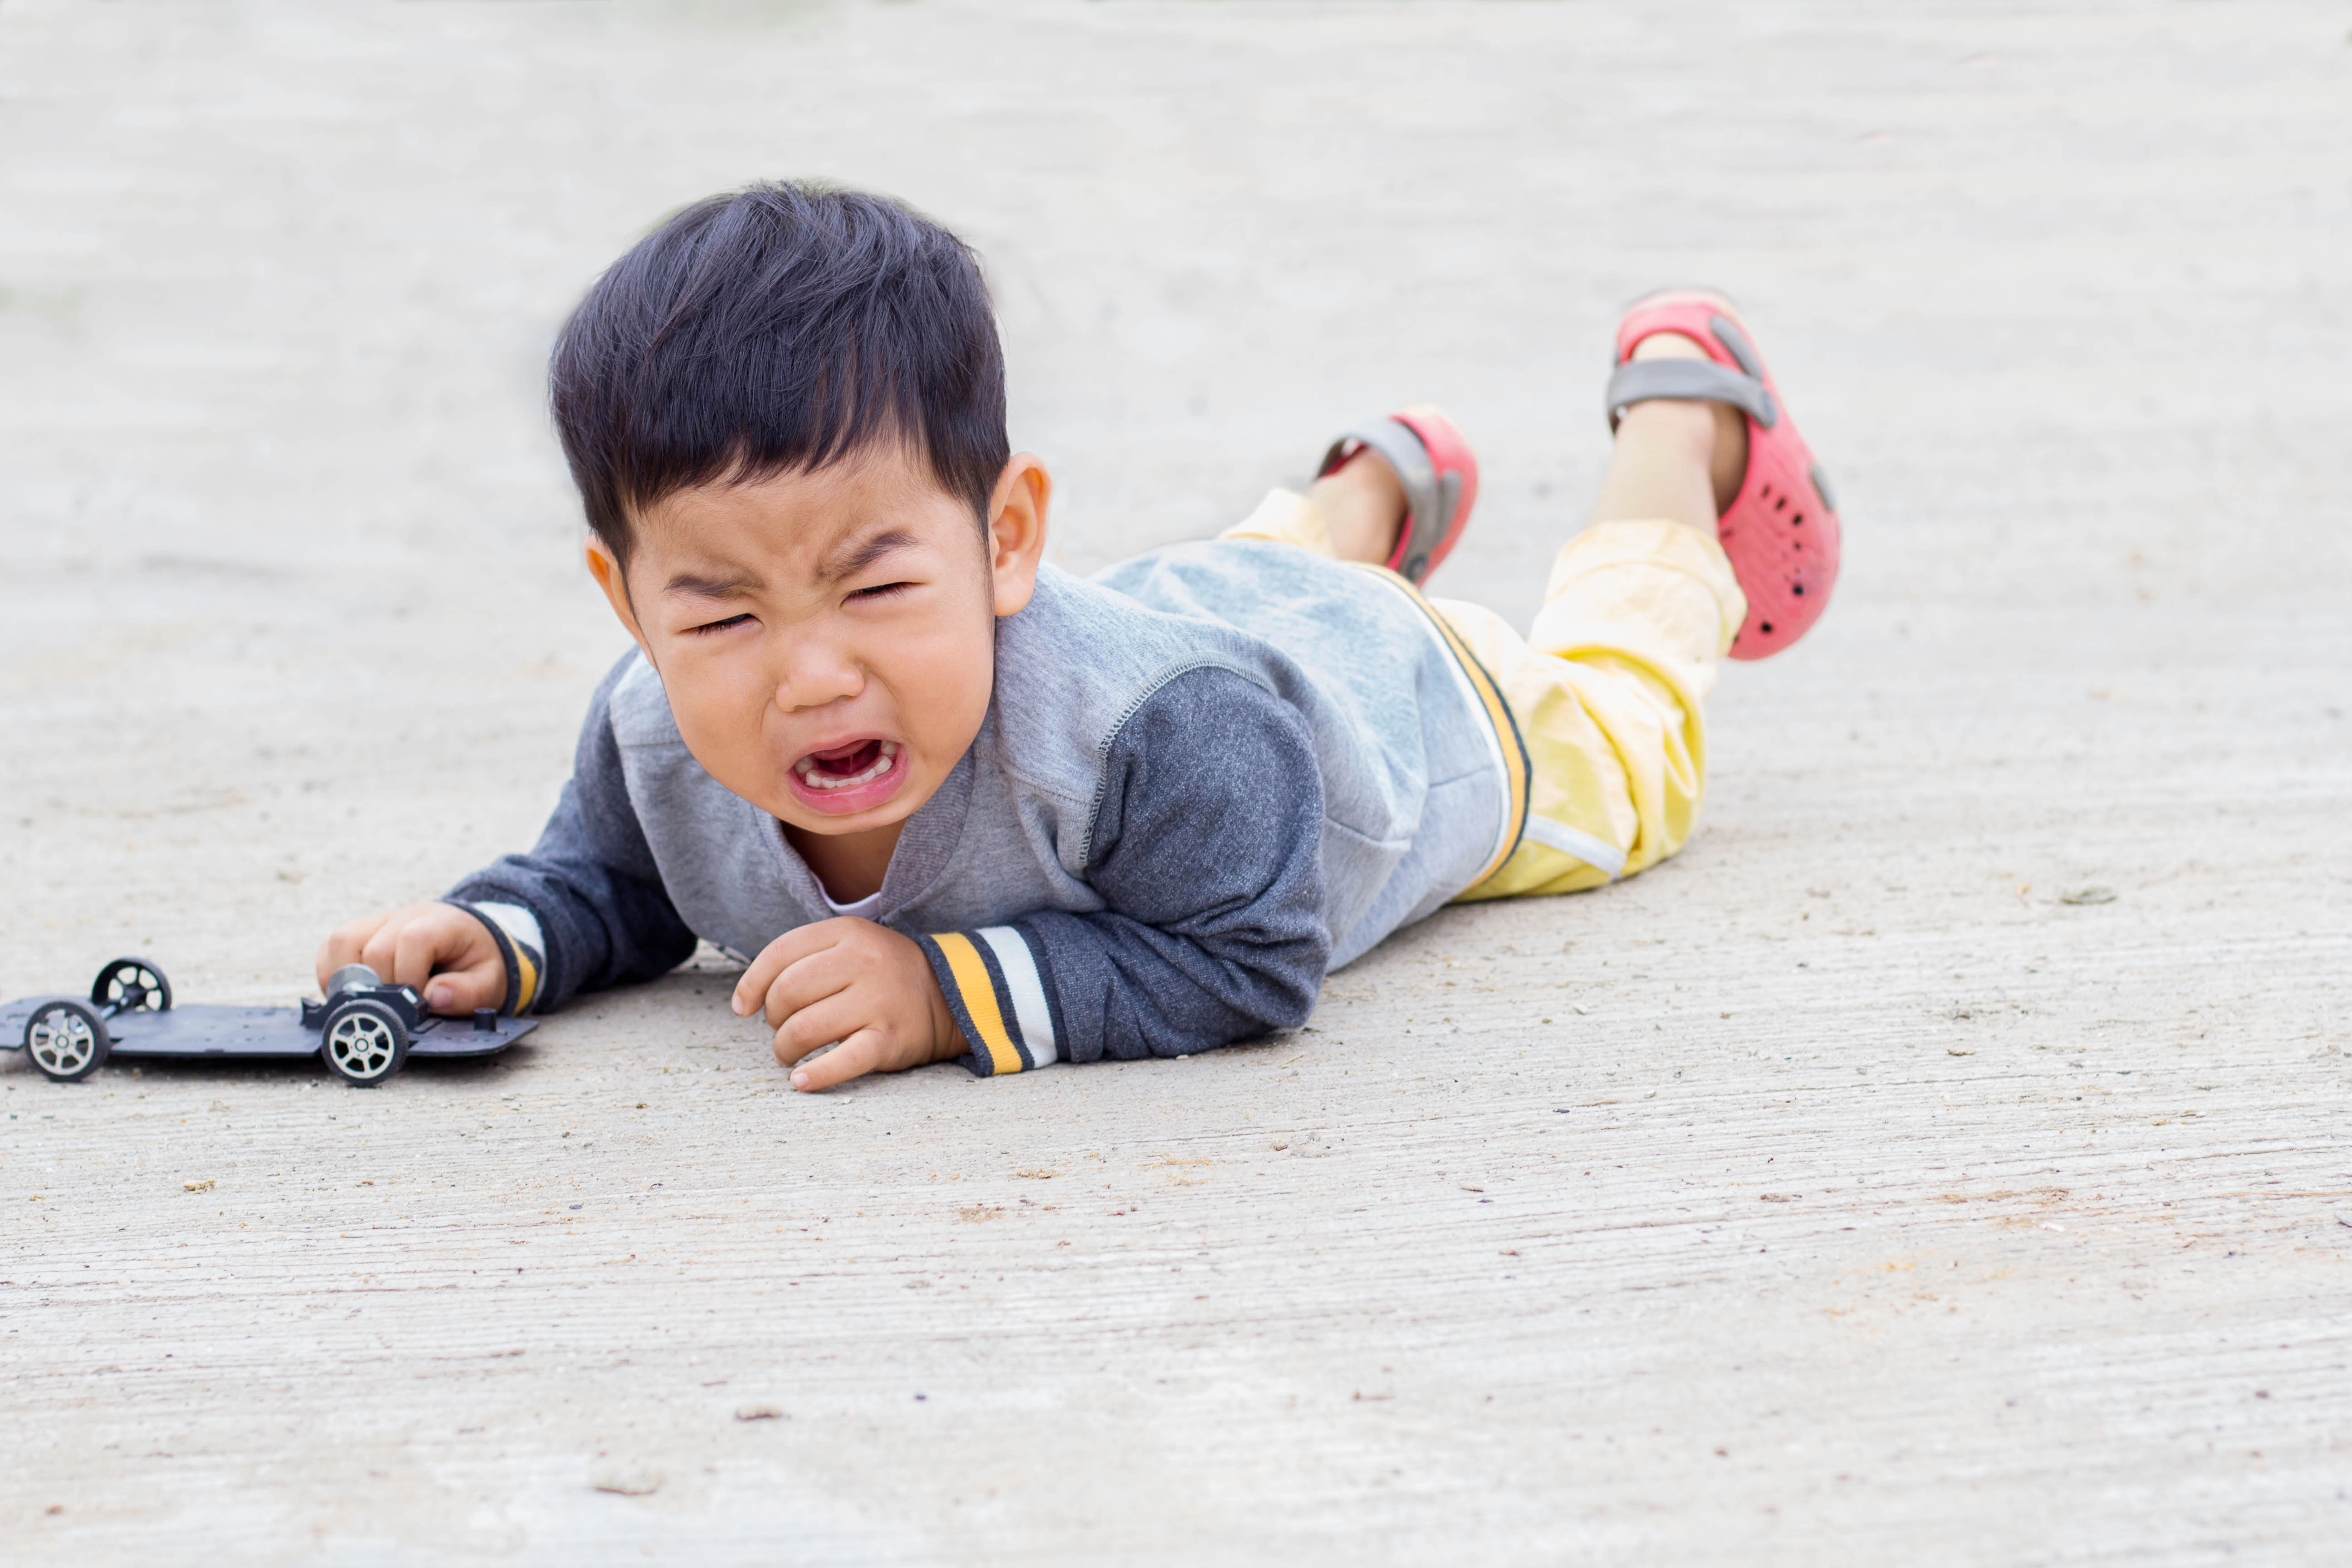 Injuries in young children are caused by falls while learning to walk or during play